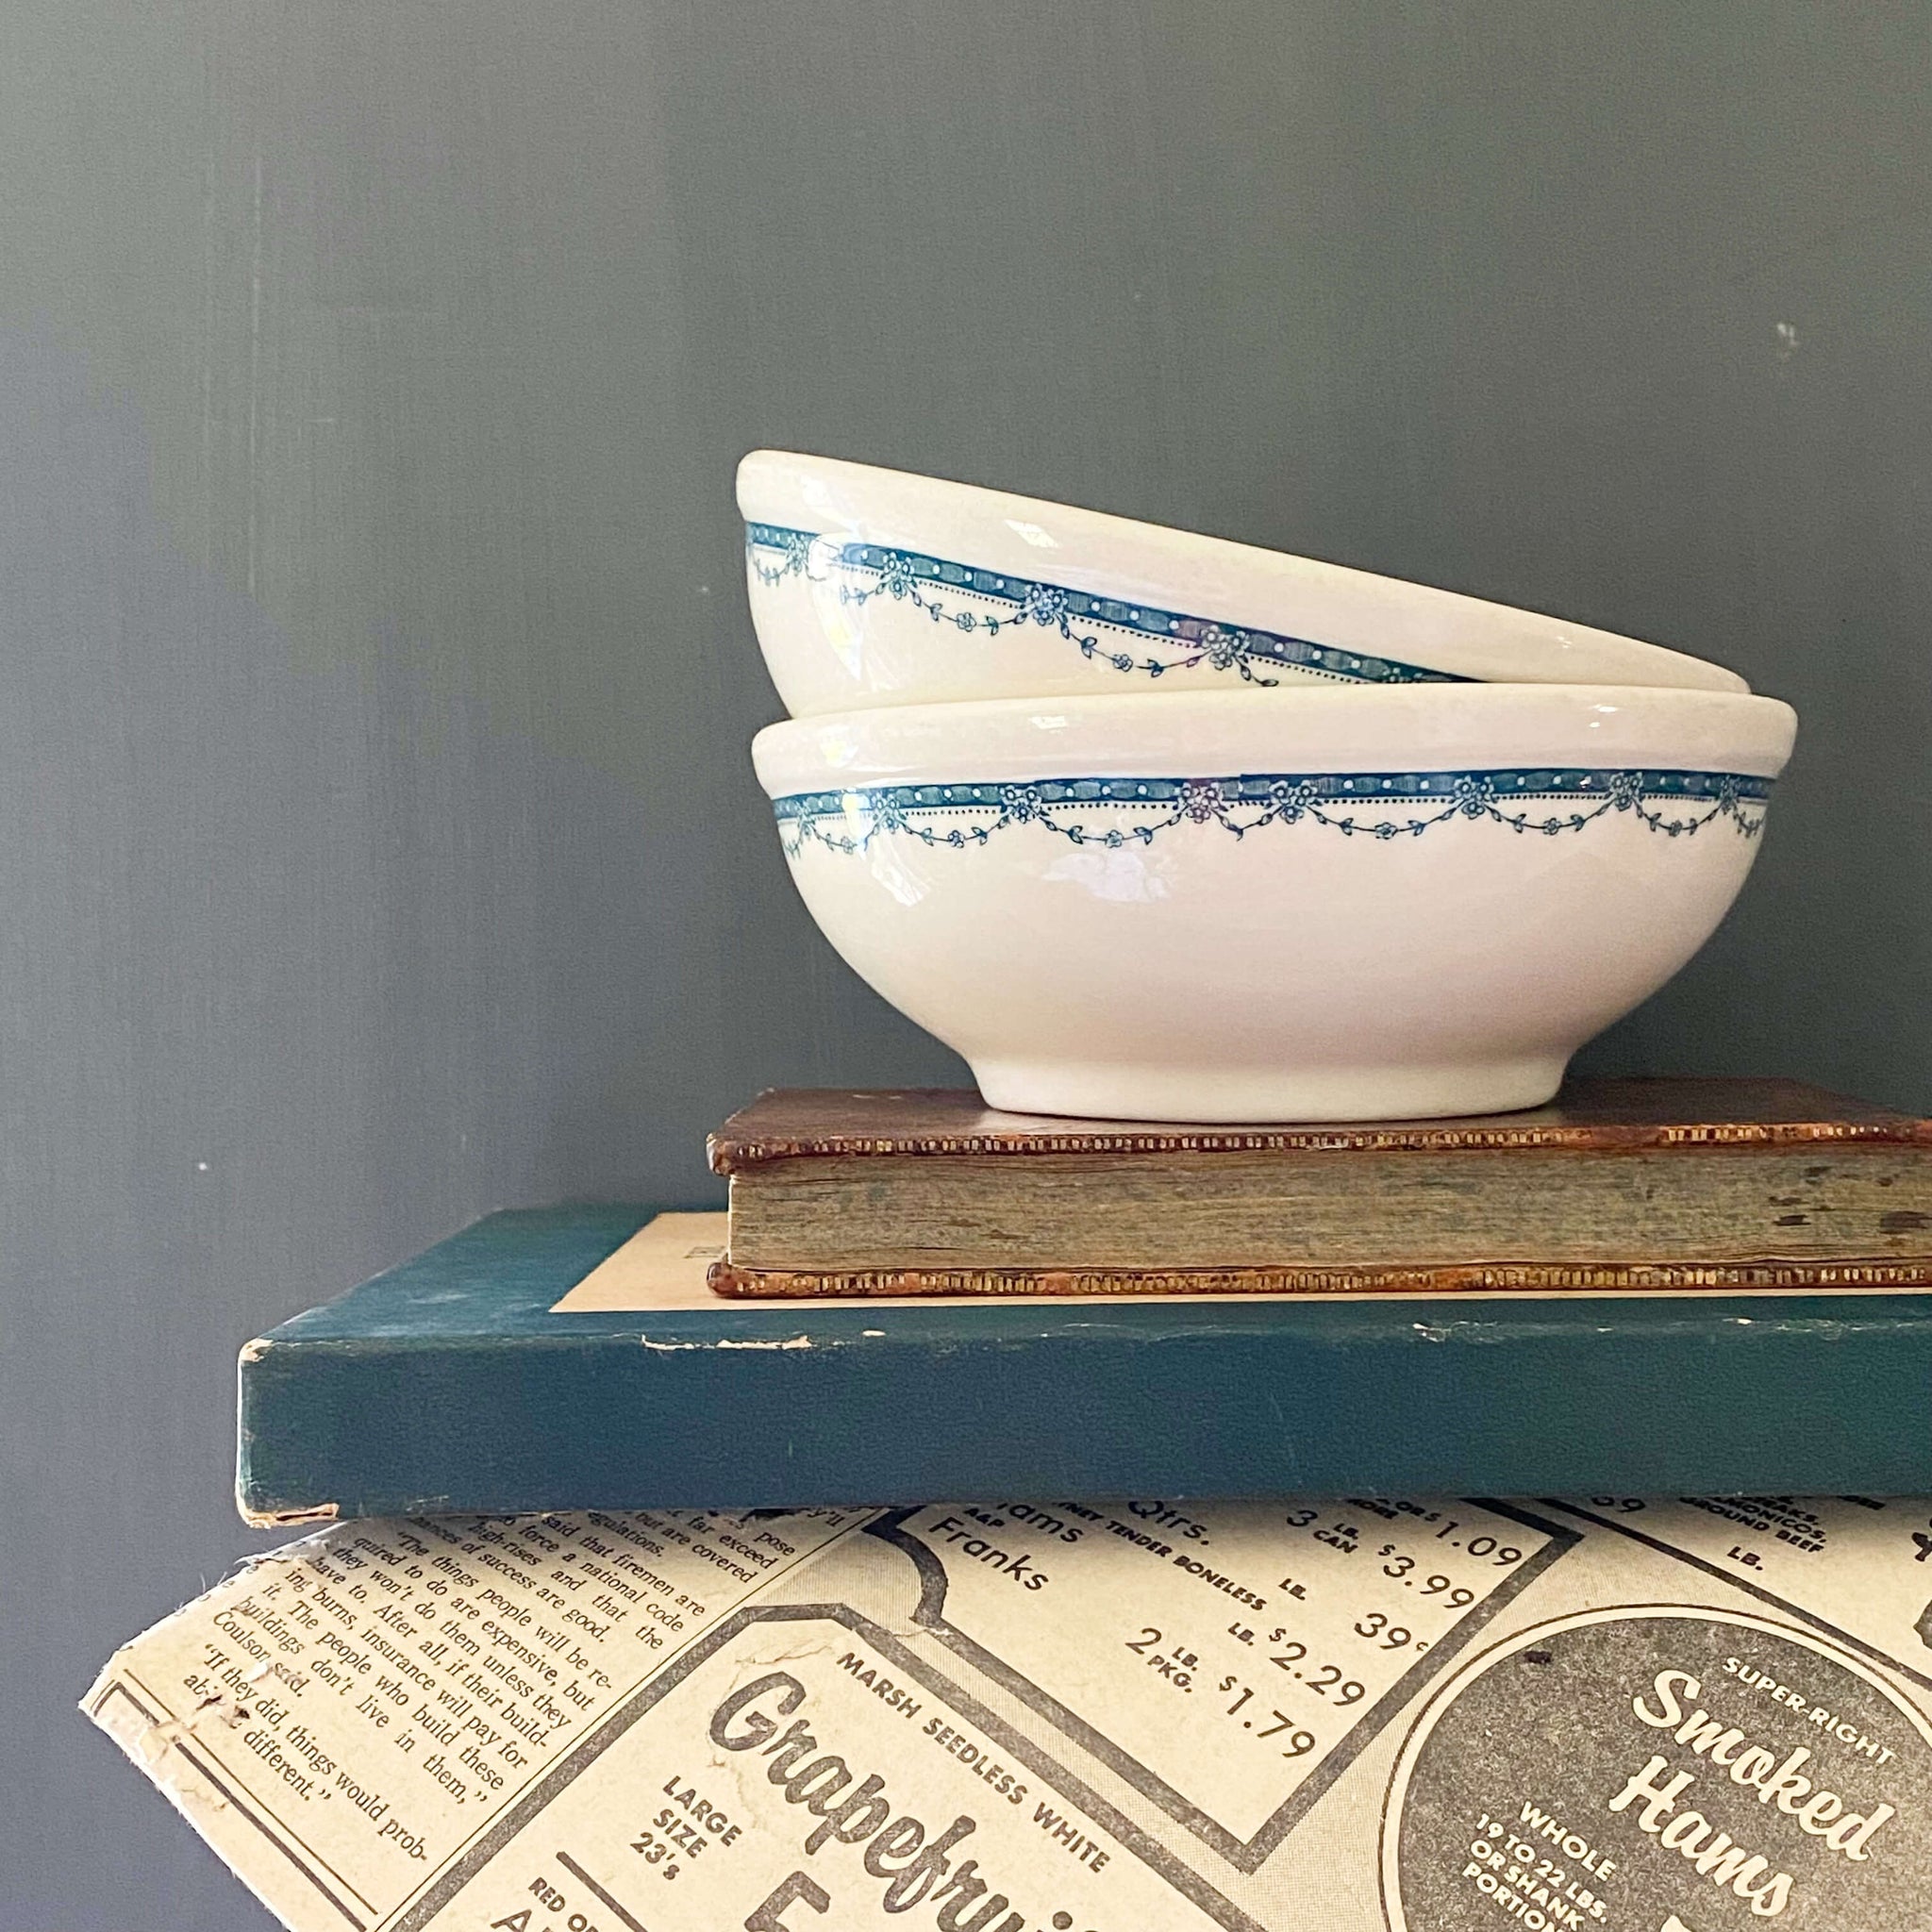 Vintage 1930s Shenango Restaurant Ware Cereal Bowls with Teal Trim - Set of Two circa 1930s-1940s